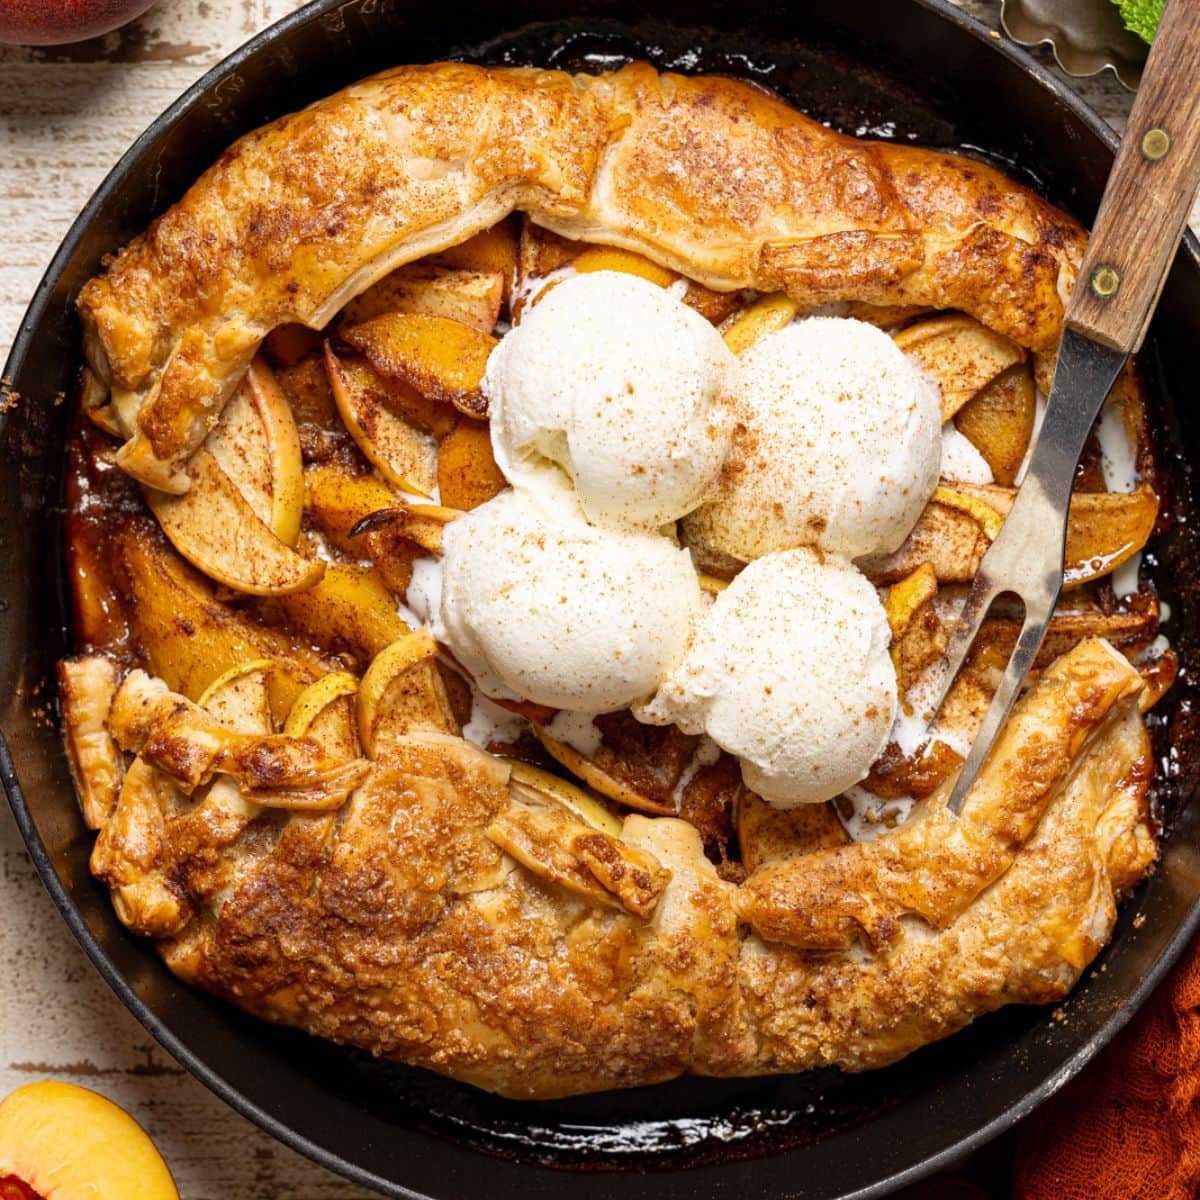 Galette in a black skillet with a fork and scoops of ice cream.